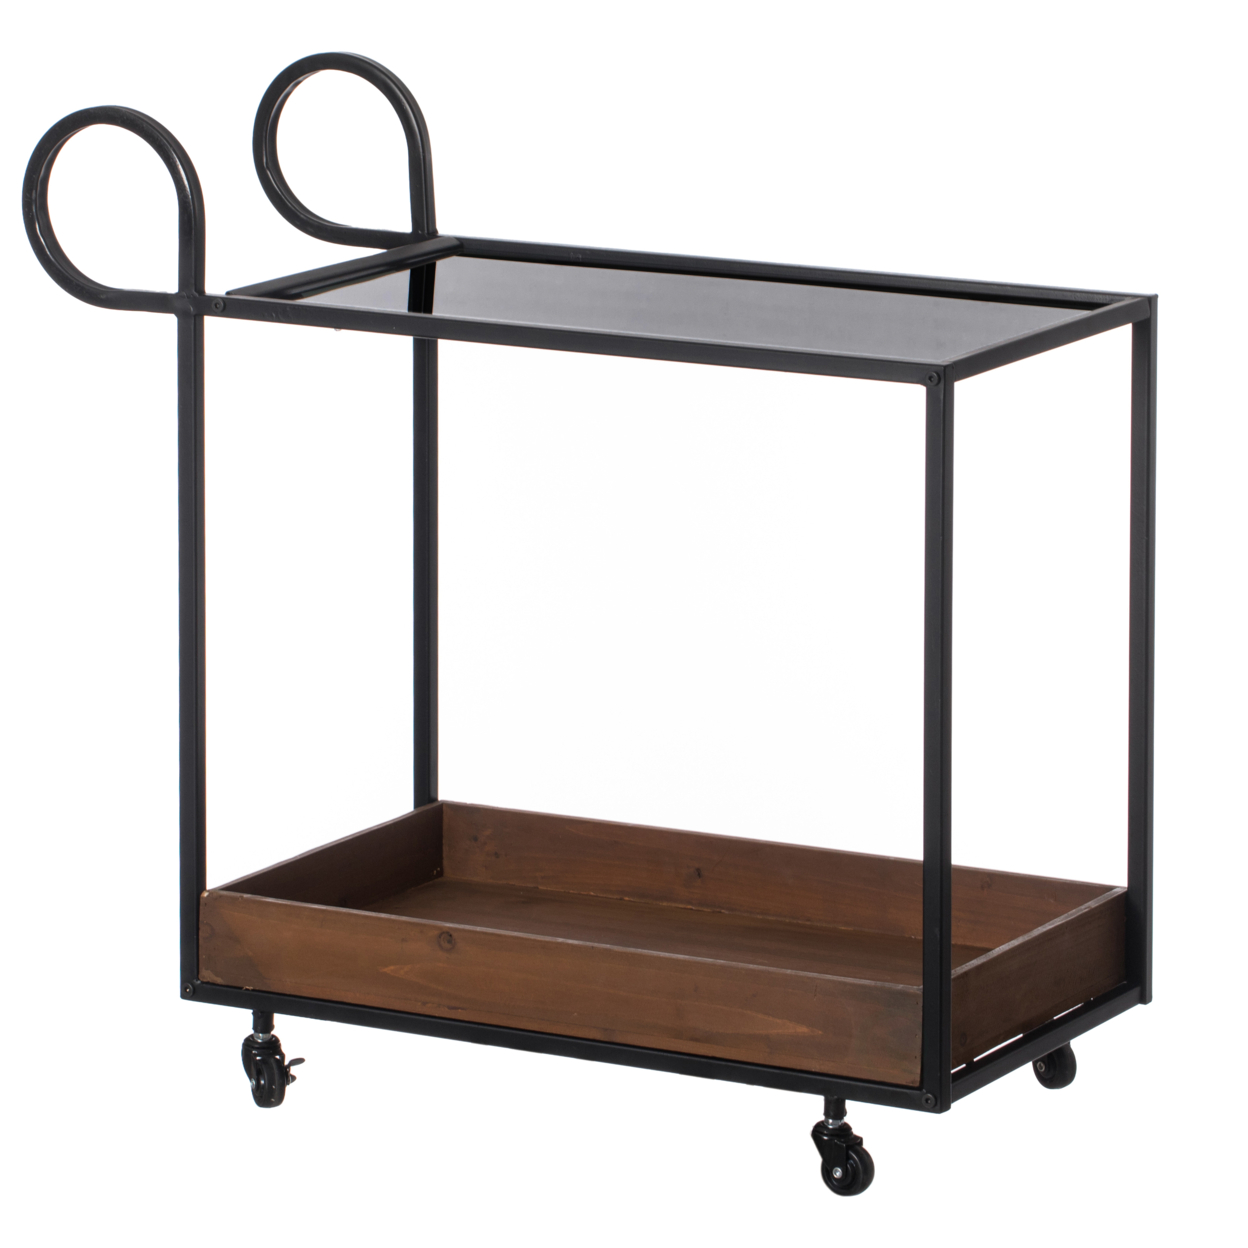 Metal Wine Bar Serving Cart With Rolling Wheels And Handles For Dining, Living Room Or Entryway